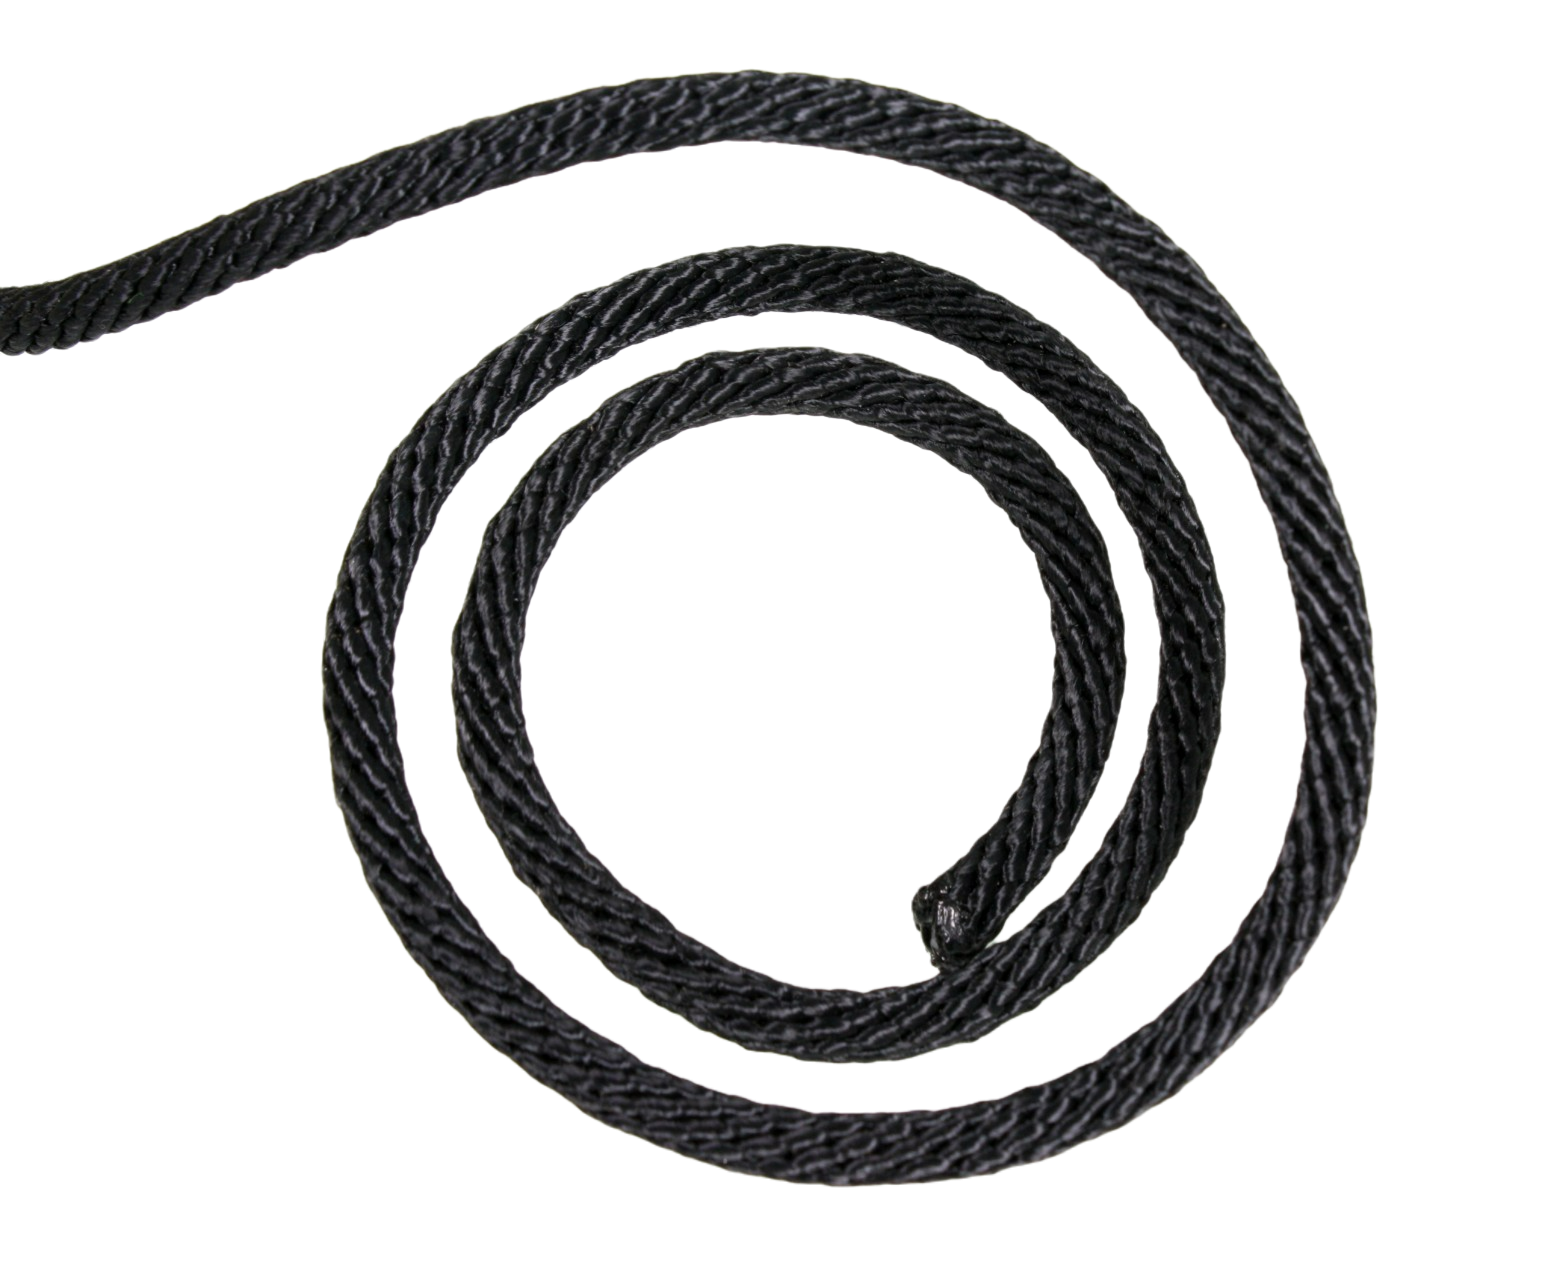 A coil of loose black sash